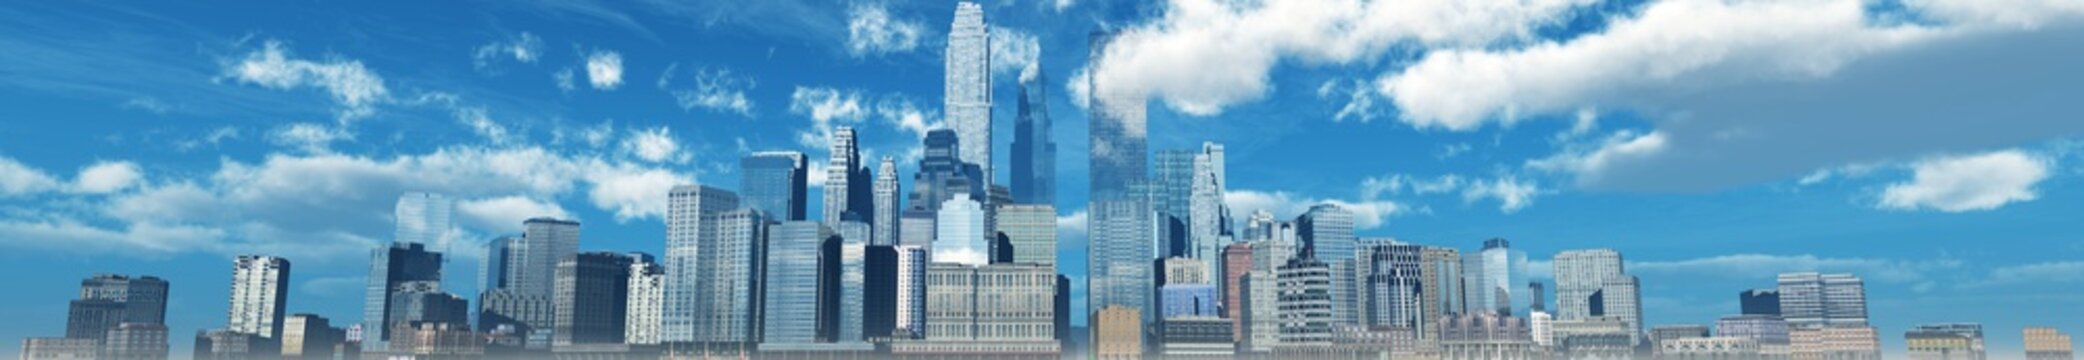 modern city, panorama of a city landscape against the sky with clouds,
